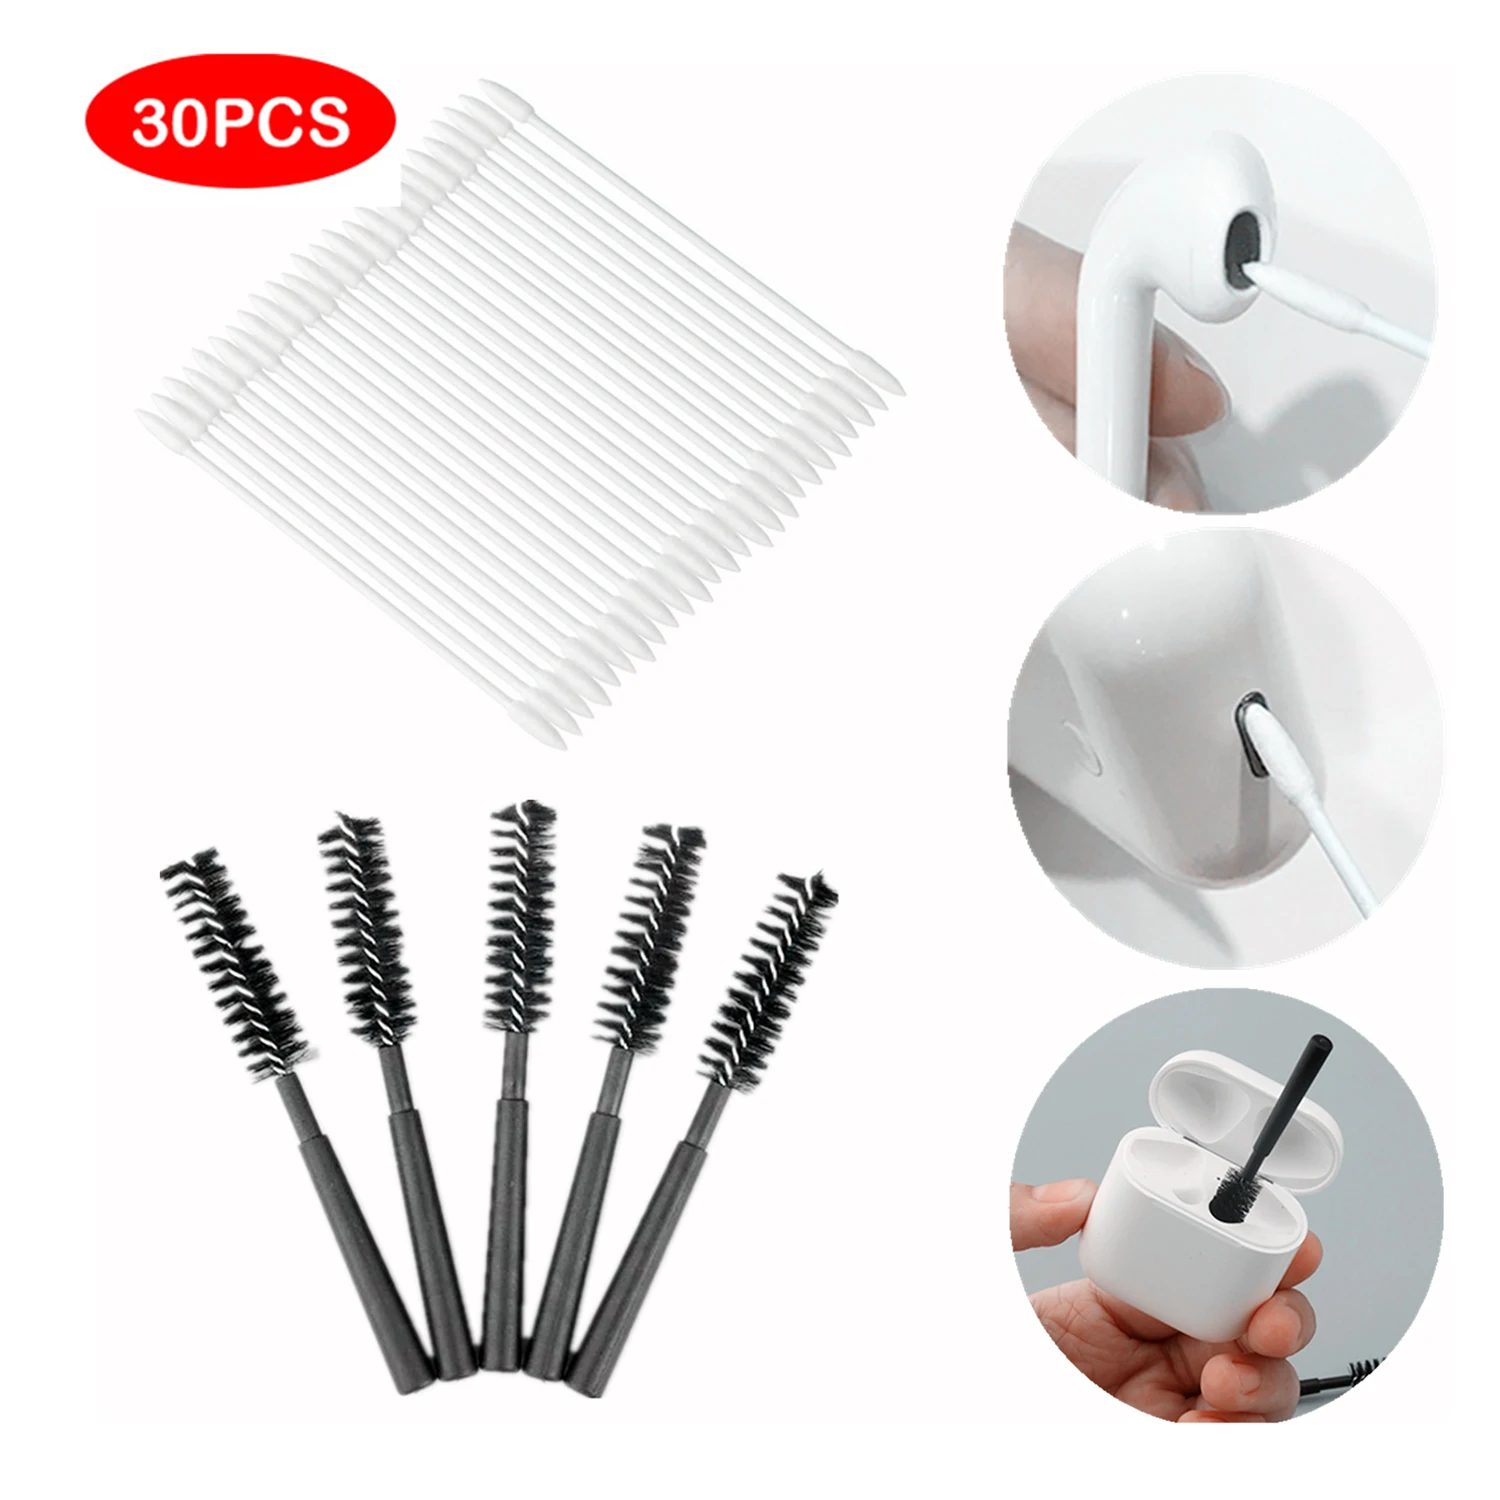 

Vococal 5pcs Brush Cleaning Tool+25pcs Cotton Disposable Swab For Airpods pro 3 2 1 Redmi Airdots Earphones Box Case Clean Tools